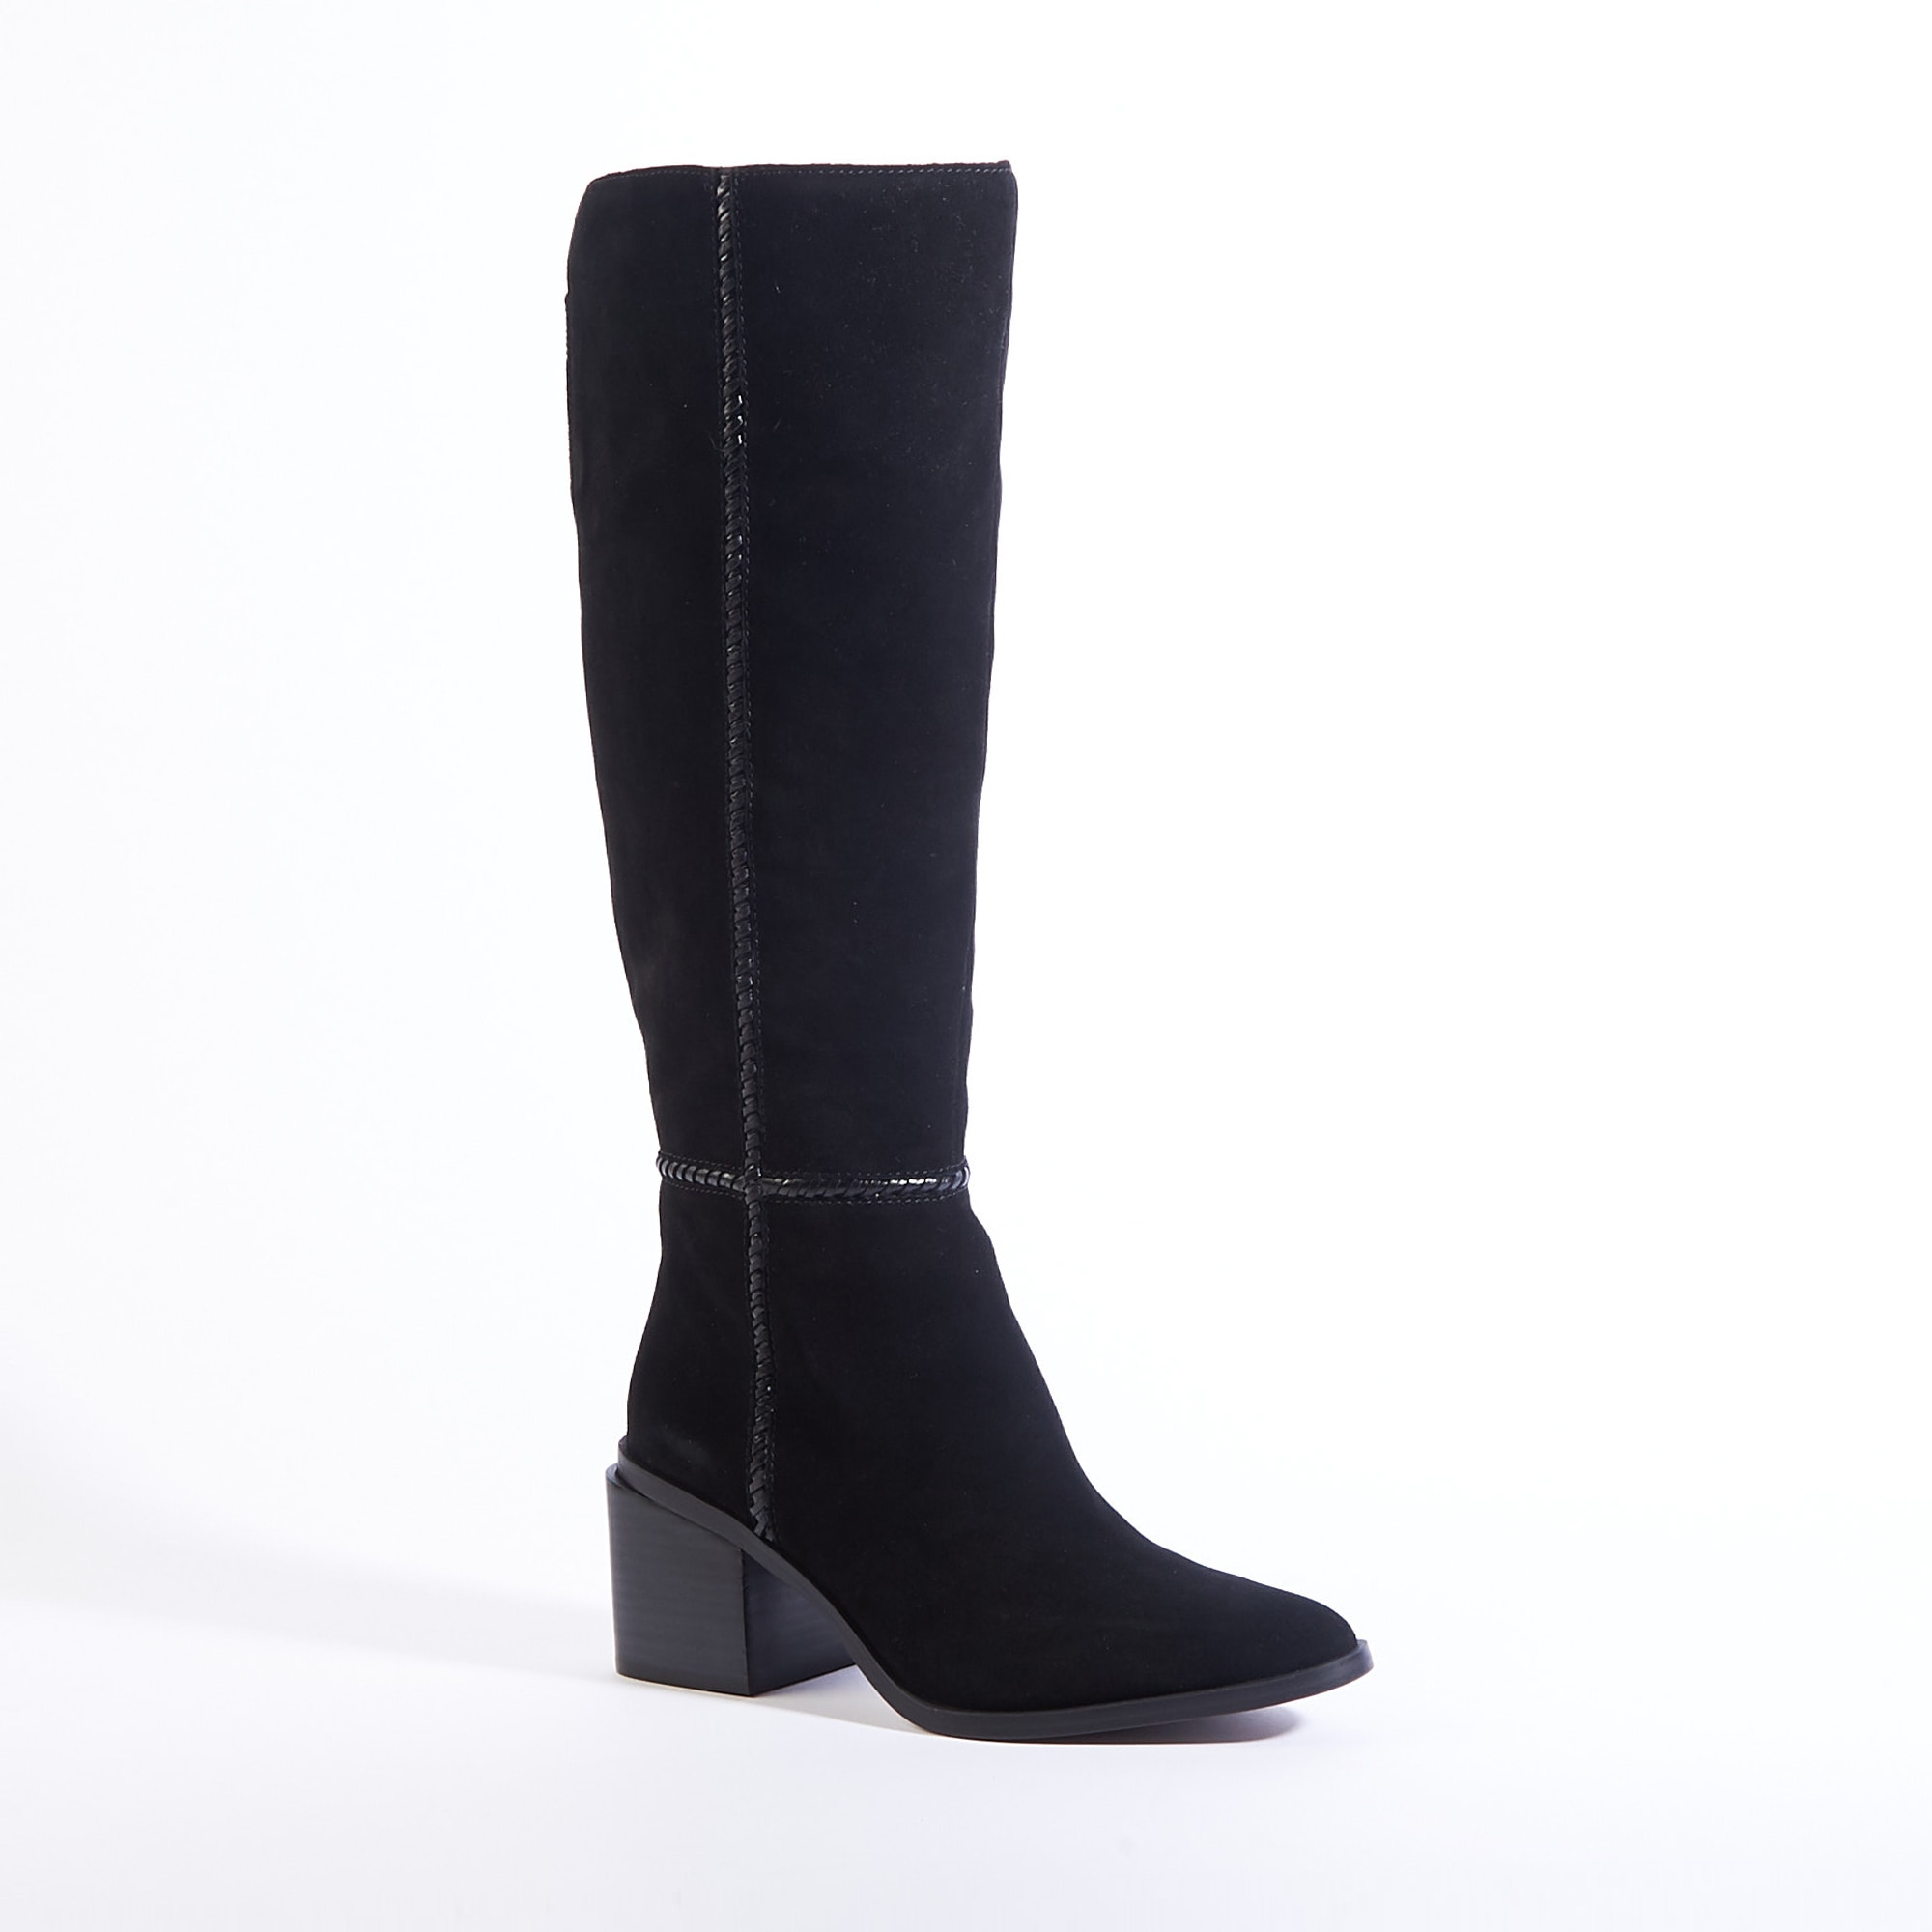 Therapy Shoes Wolf Black | Women's Boots | Knee High | Tall | 90's